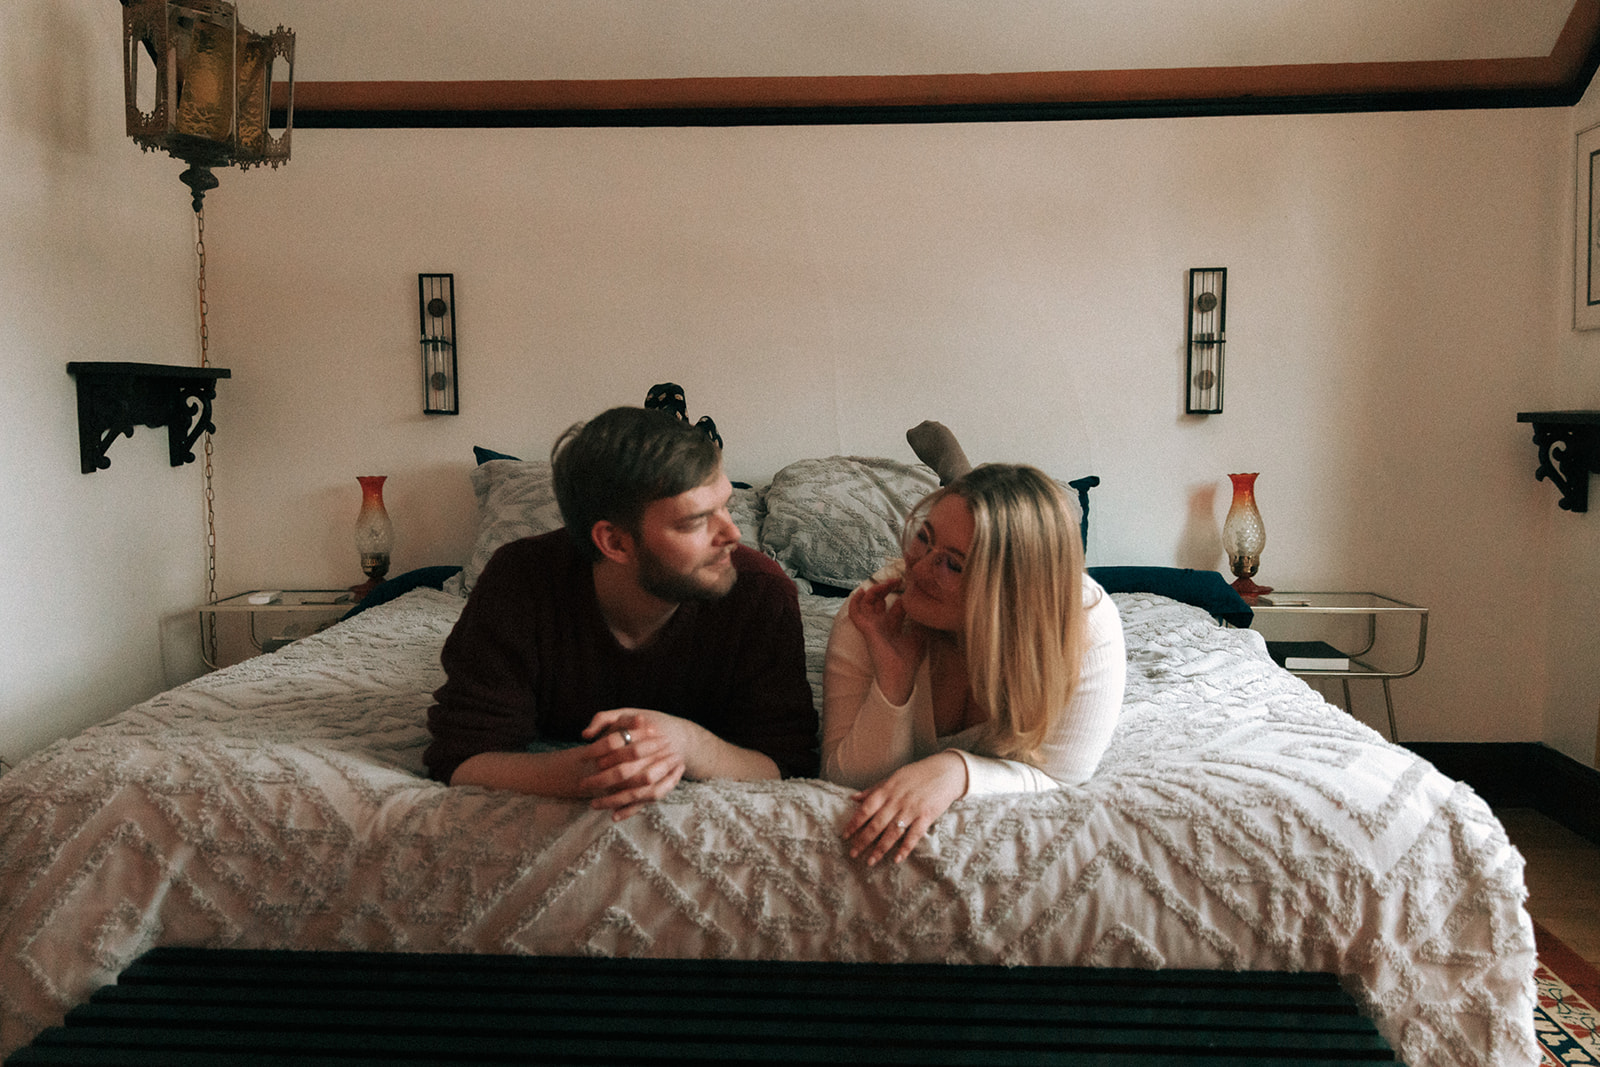 Engagement pictures on the bed in a cute Milwaukee airbnb